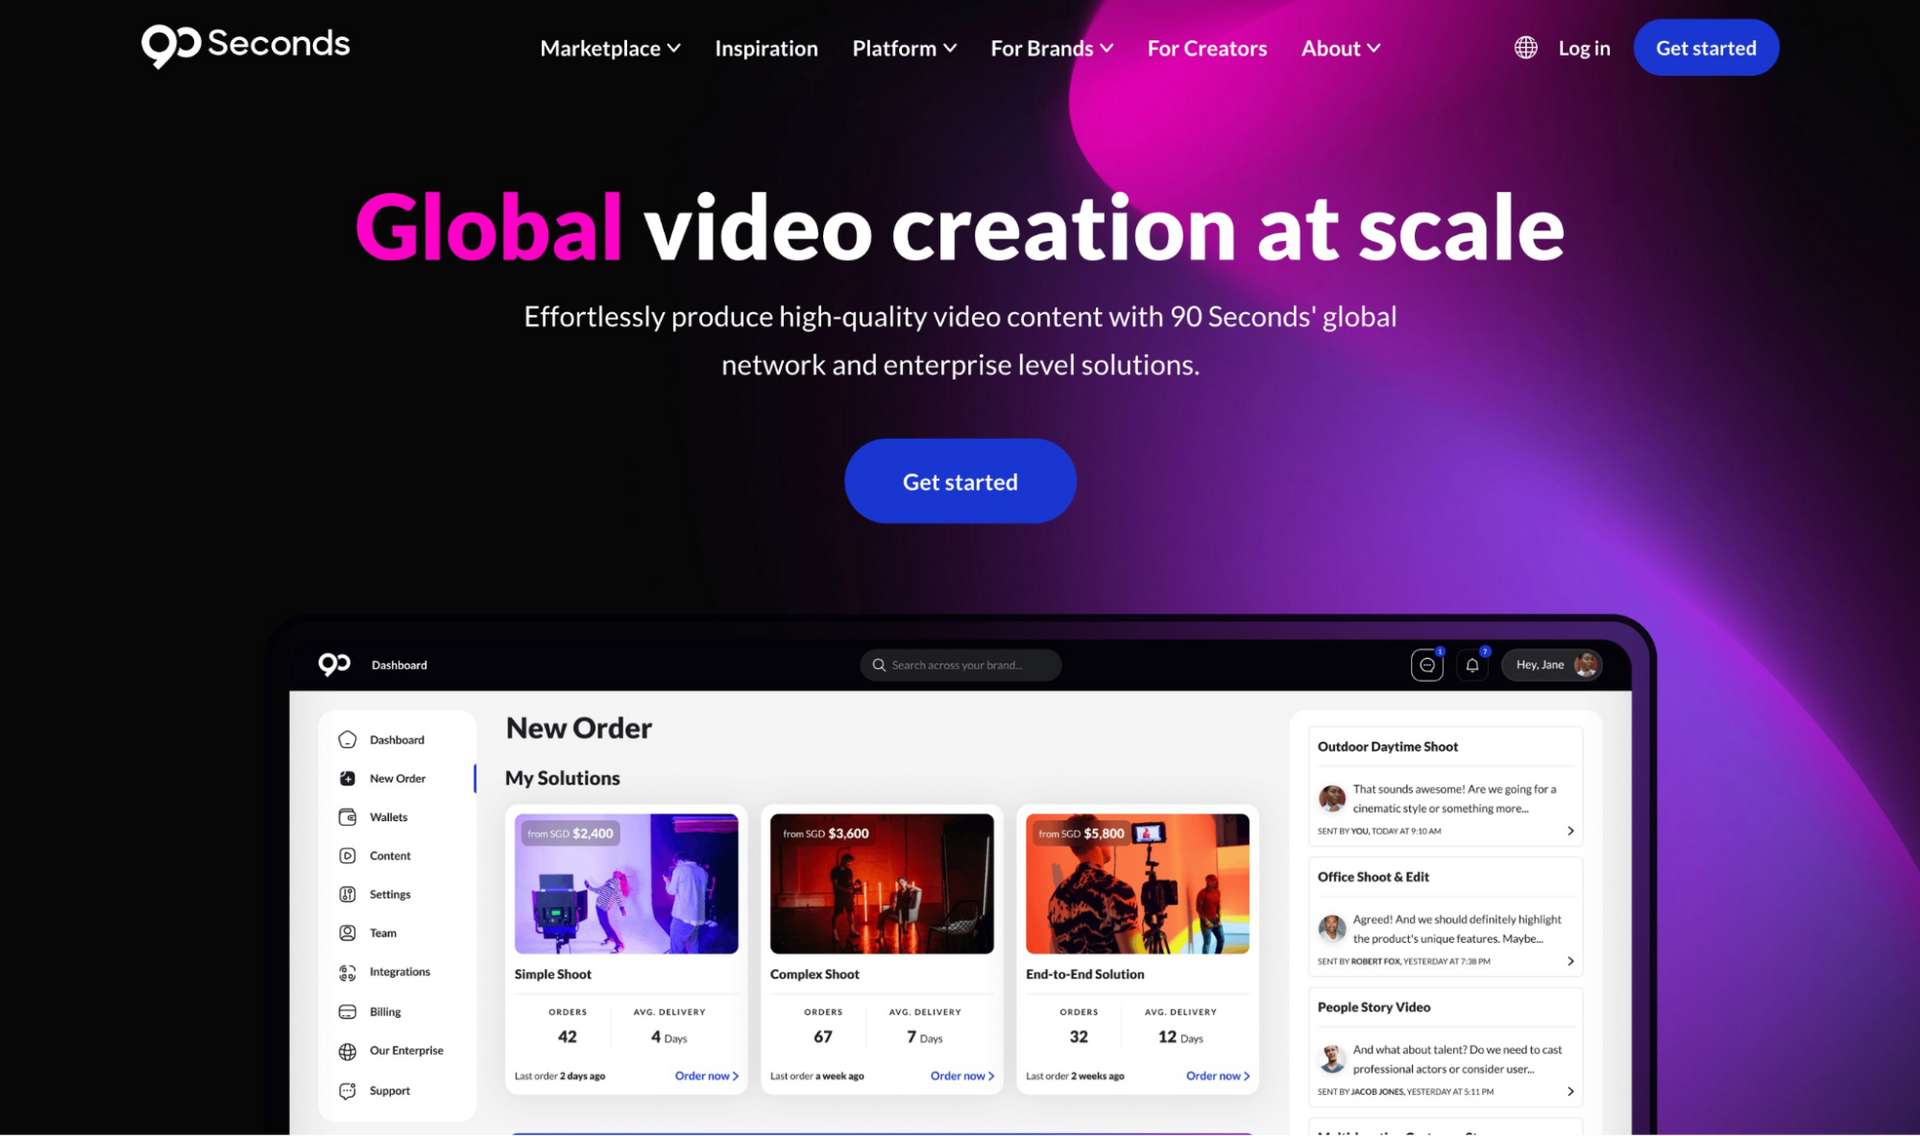 90 Seconds: Global video creation at scale